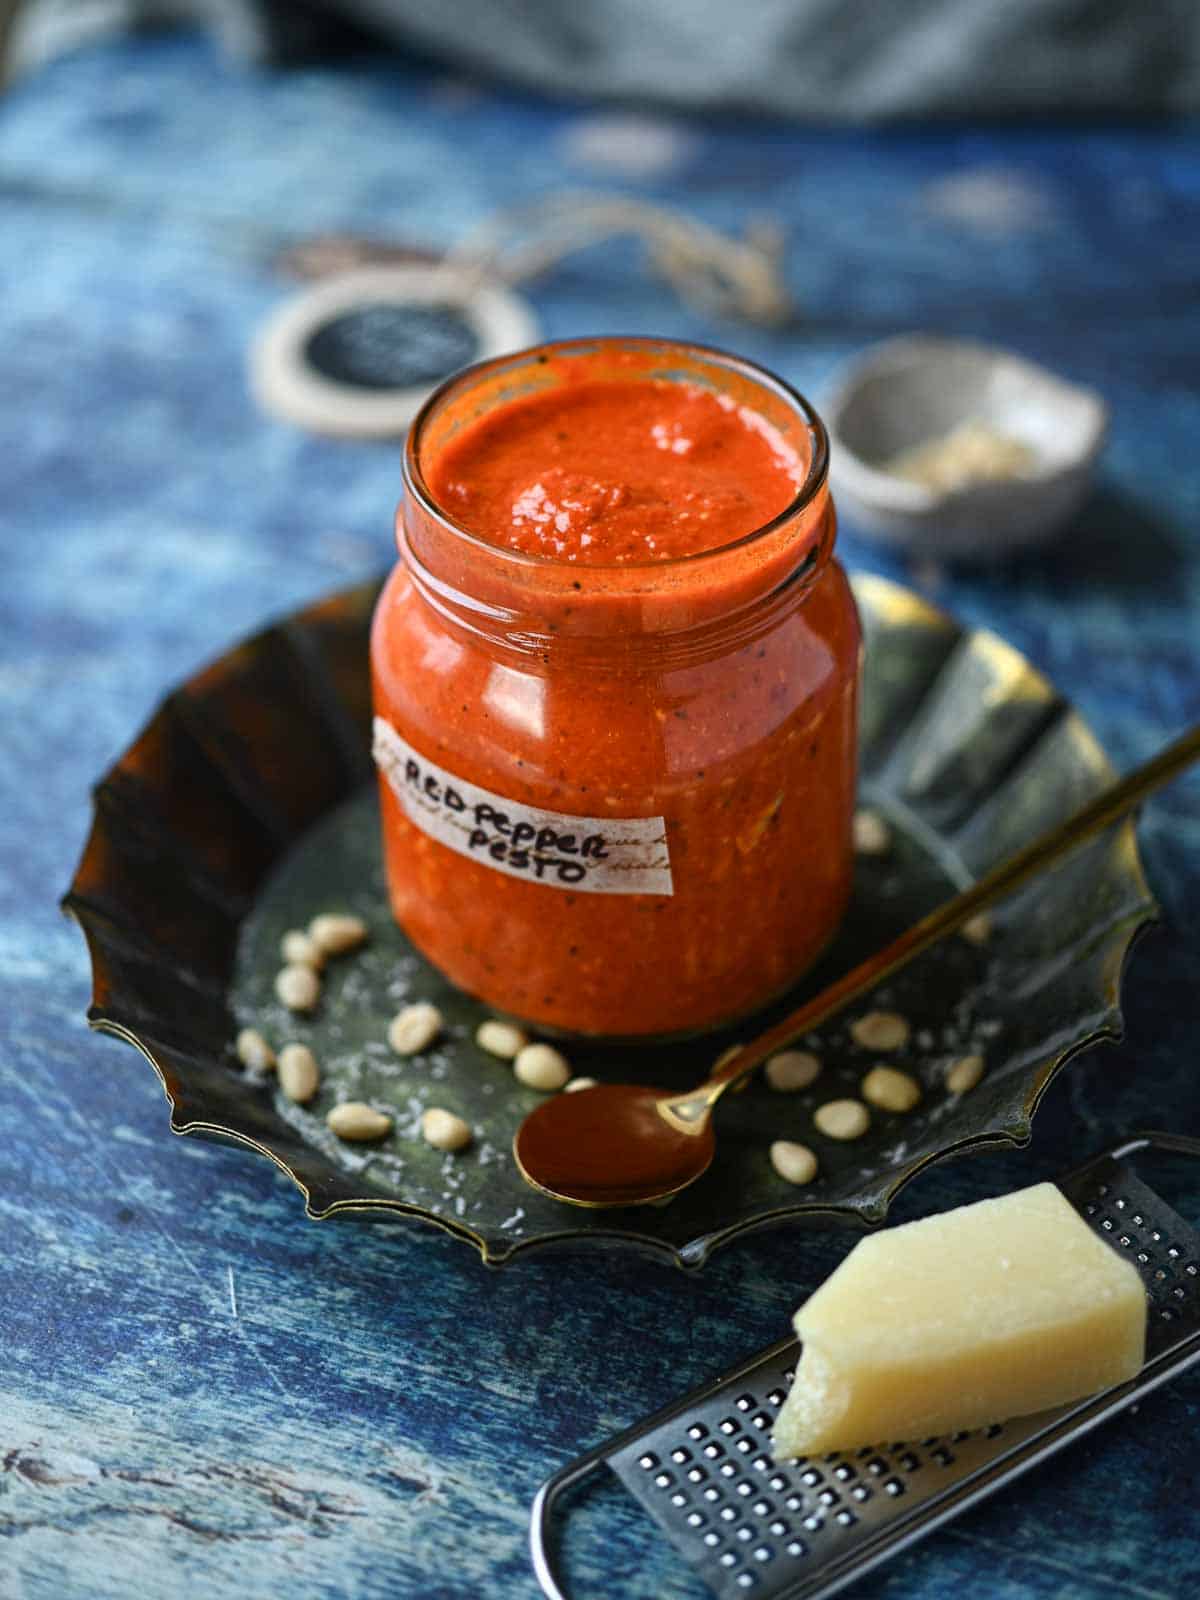 Red pepper pesto in a jar with grated cheese in the front on a blue surface.